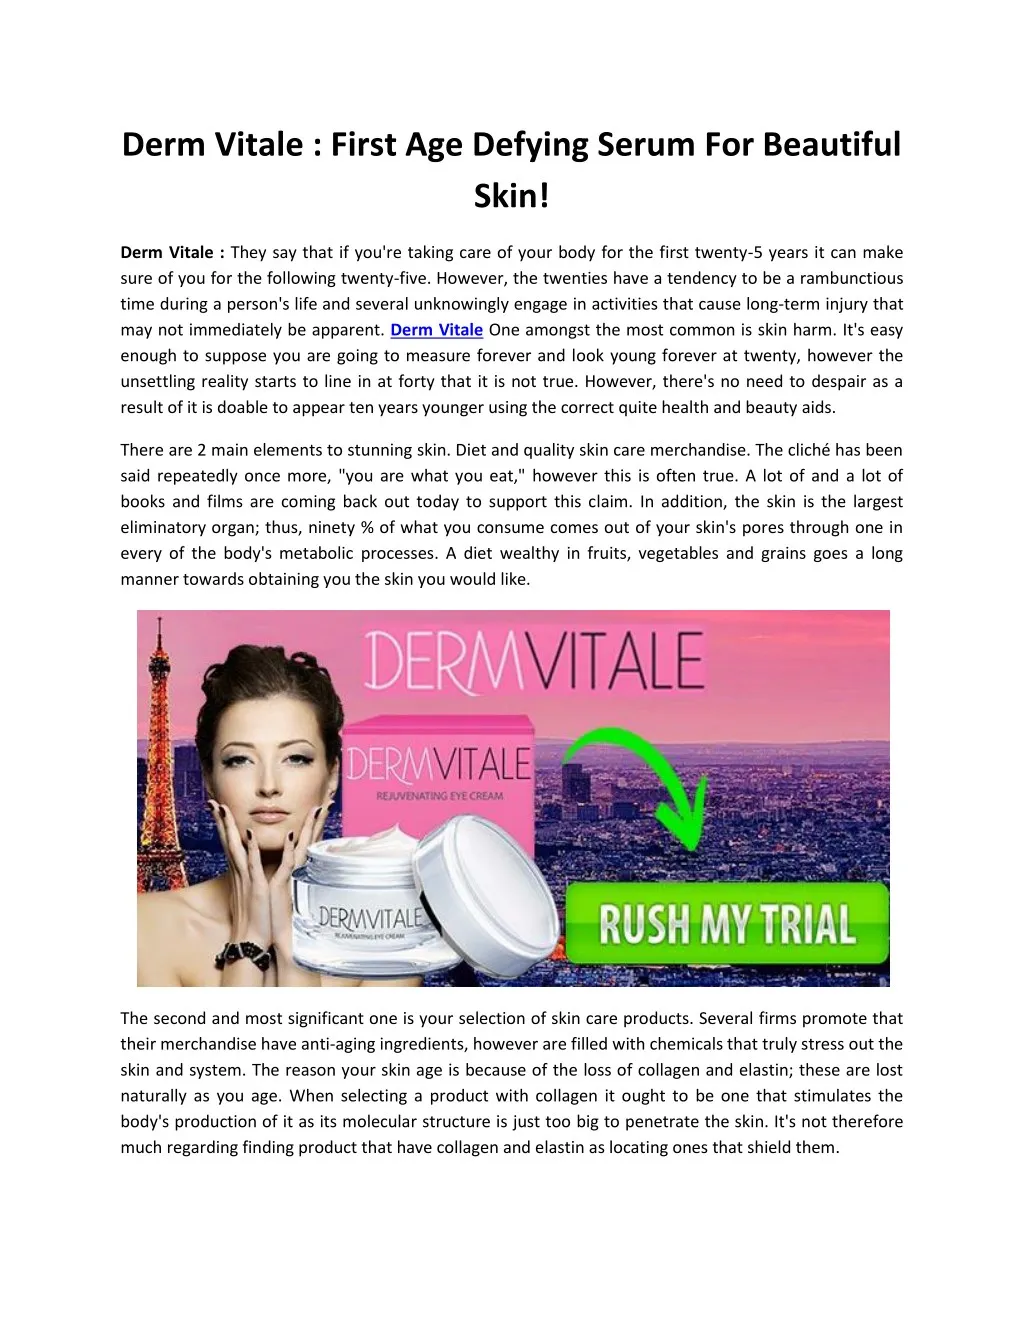 derm vitale first age defying serum for beautiful